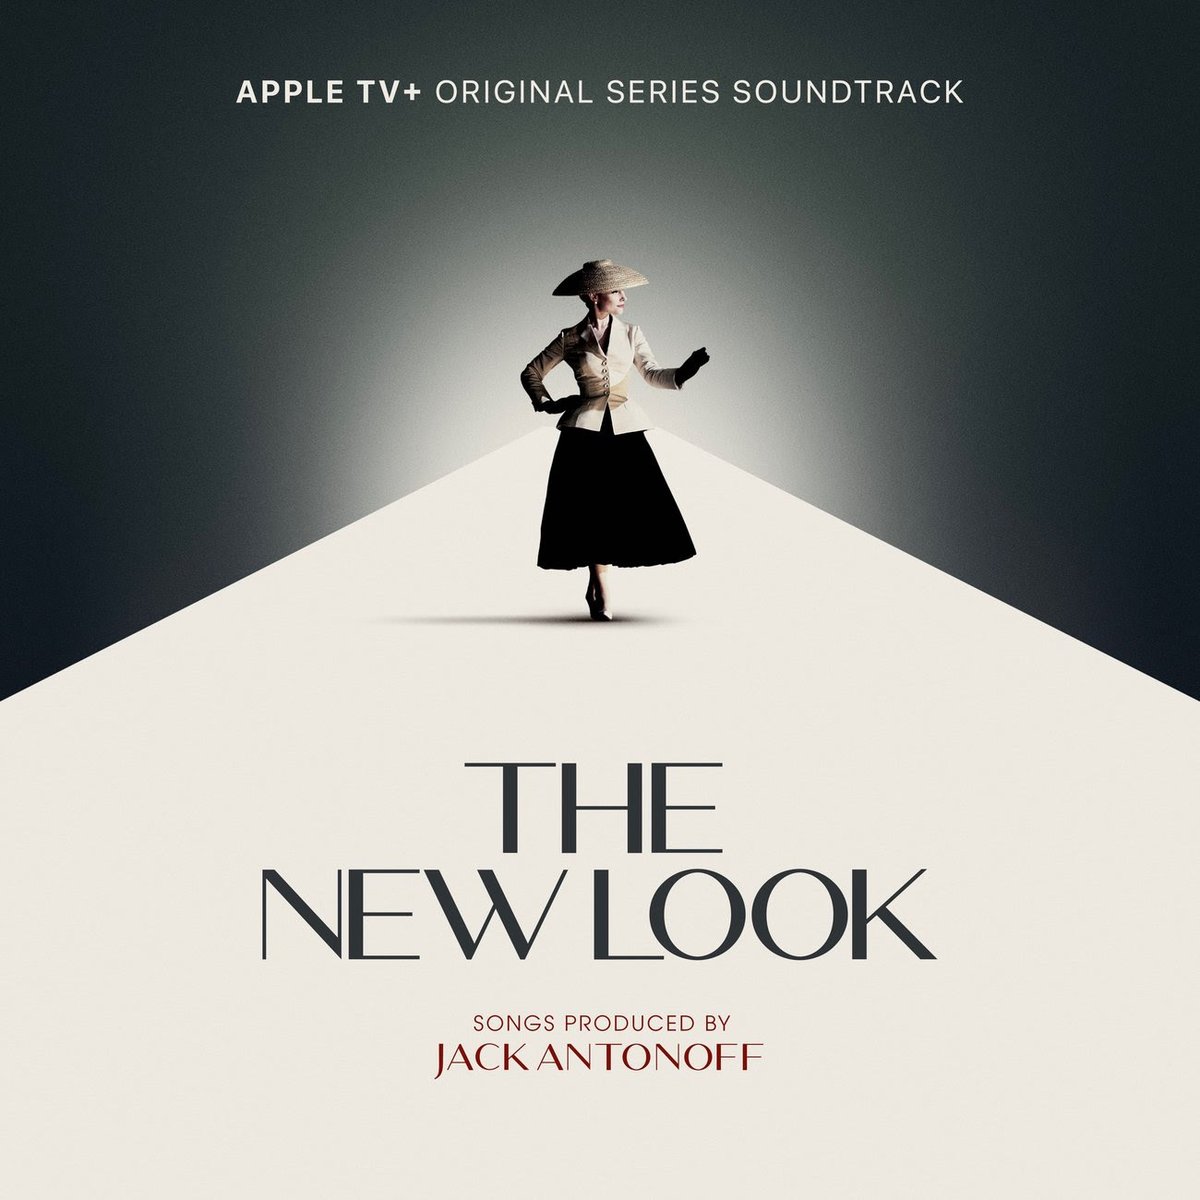 First up today on @JOY949 is 'It's Only a Paper Moon' by young London artist @beabad00bee - from the fabulous soundtrack album for the @AppleTV series THE NEW LOOK